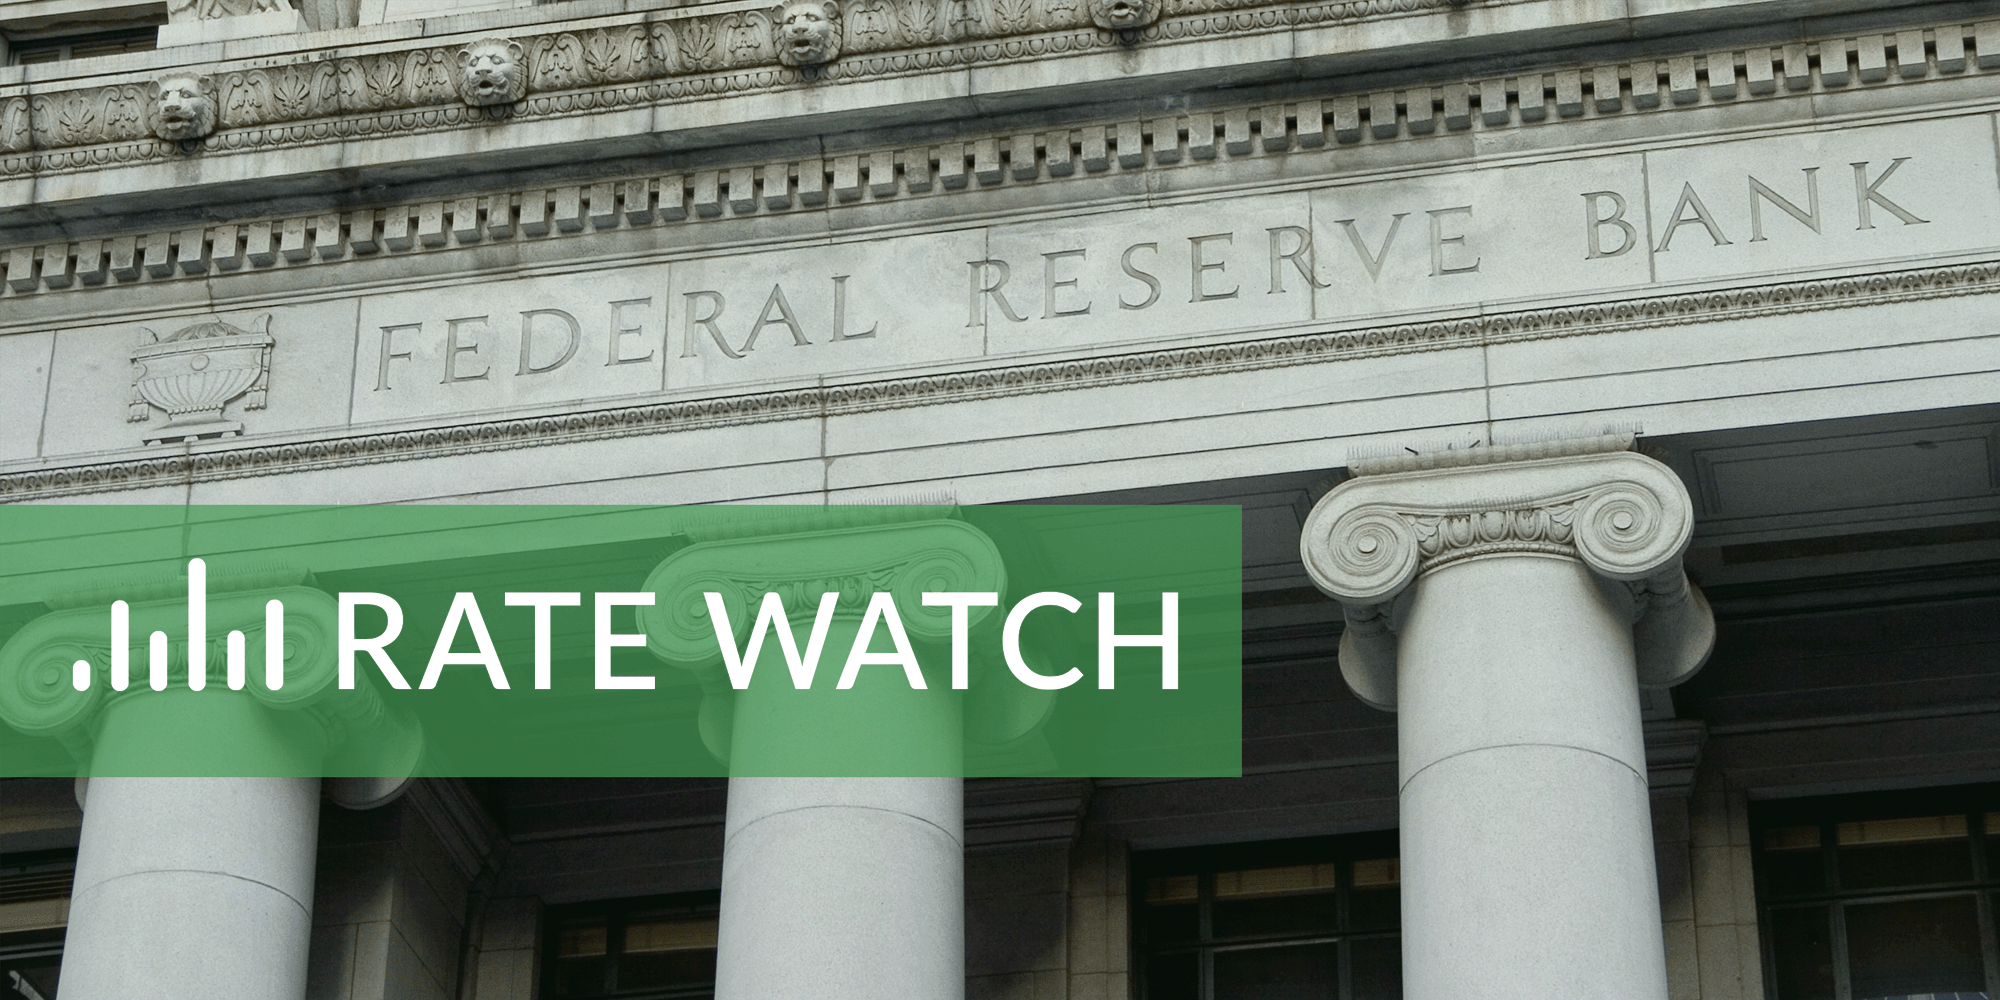 Rate Watch: Fed Increases Rates at February 2023 Meeting